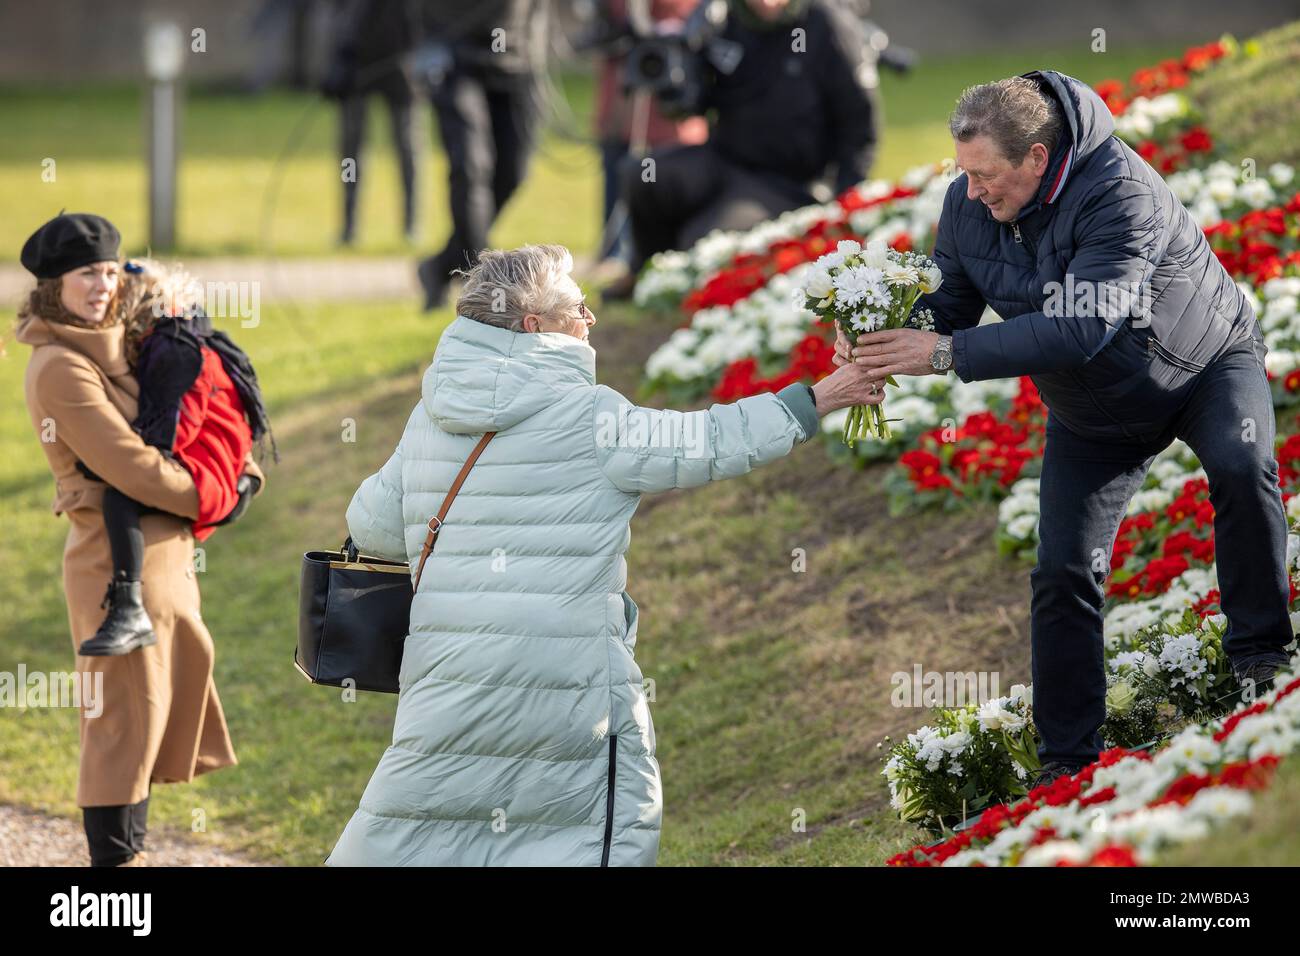 OUWERKERK, THE NETHERLANDS - FEBRUARI 1: Young and old bringing flowers to the memorial during The Flood of 1953 Commemoration at The Watersnoodmuseum (Flood Museum) on February 1st, 2023 in Ouwerkerk, Netherlands (Photo by Peter van der Klooster/Orange Pictures) Stock Photo